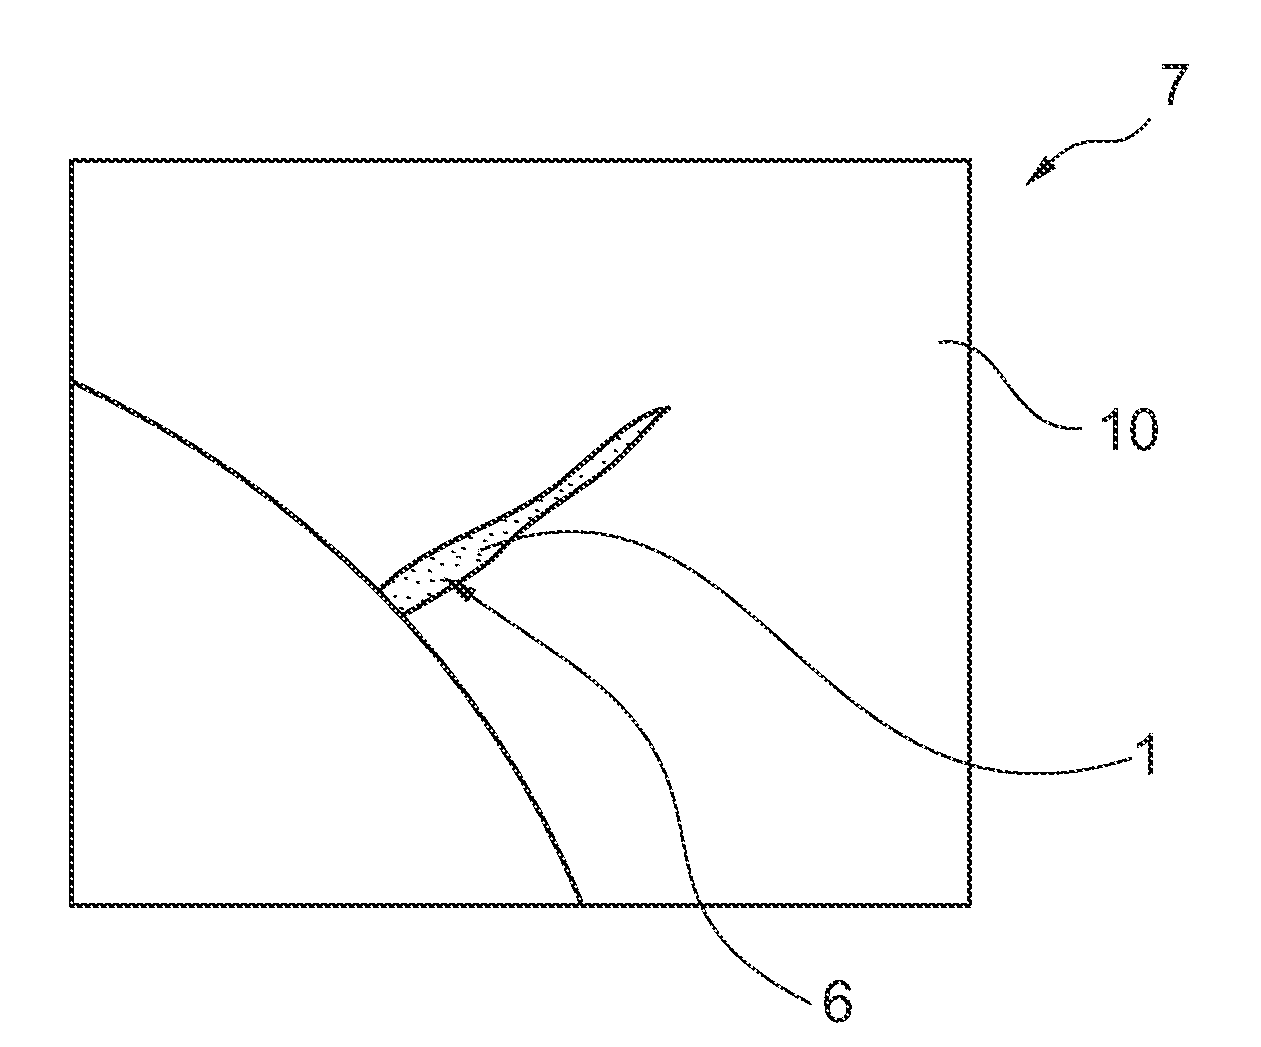 Braze alloy for high-temperature brazing and methods for repairing or producing components using a braze alloy